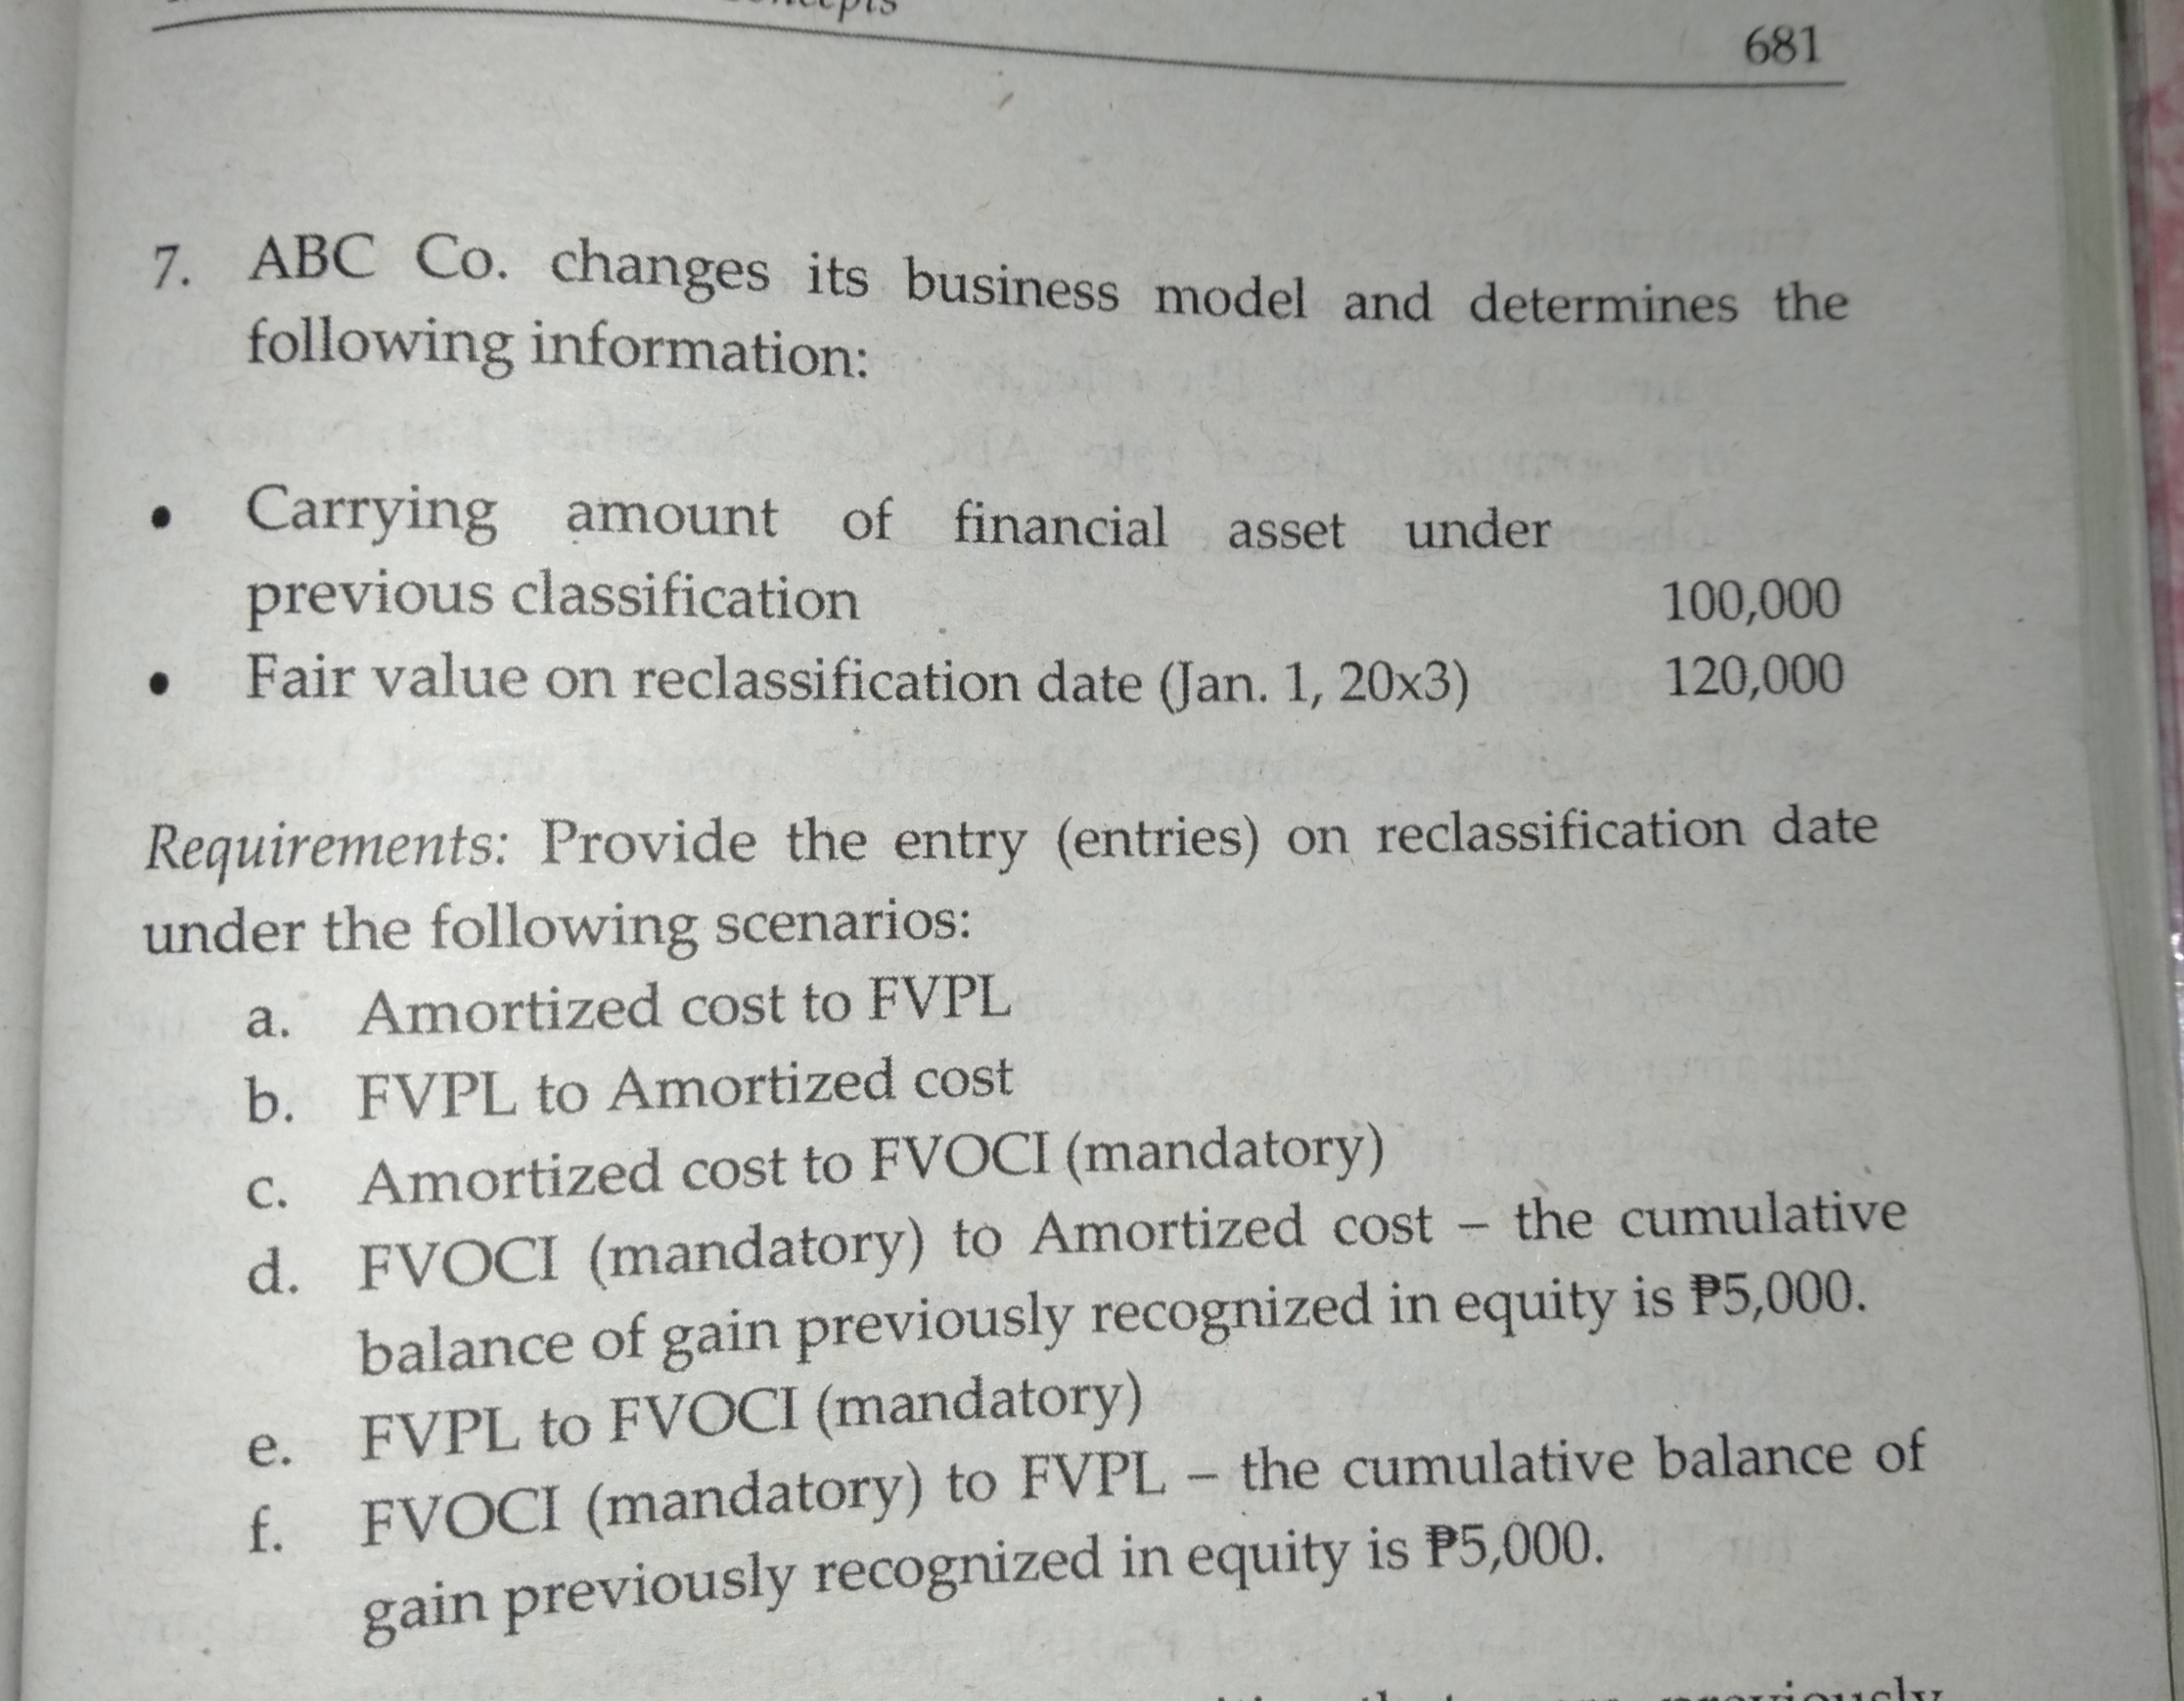 681
ABC Co. changes its business model and determines the
following information:
7.
Carrying amount of
previous classification
Fair value on reclassification date (Jan. 1, 20x3)
financial asset under
100,000
120,000
Requirements: Provide the entry (entries) on reclassification date
under the following scenarios:
Amortized cost to FVPL
a.
FVPL to Amortized cost
b.
Amortized cost to FVOCI (mandatory)
FVOCI (mandatory) to Amortized cost - the cumulative
balance of gain previously recognized in equity is P5,000.
FVPL to FVOCI (mandatory)
FVOCI (mandatory) to FVPL the cumulative balance of
gain previously recognized in equity is P5,000.
C.
www
d.
е.
www
f.
२२७०घरा
